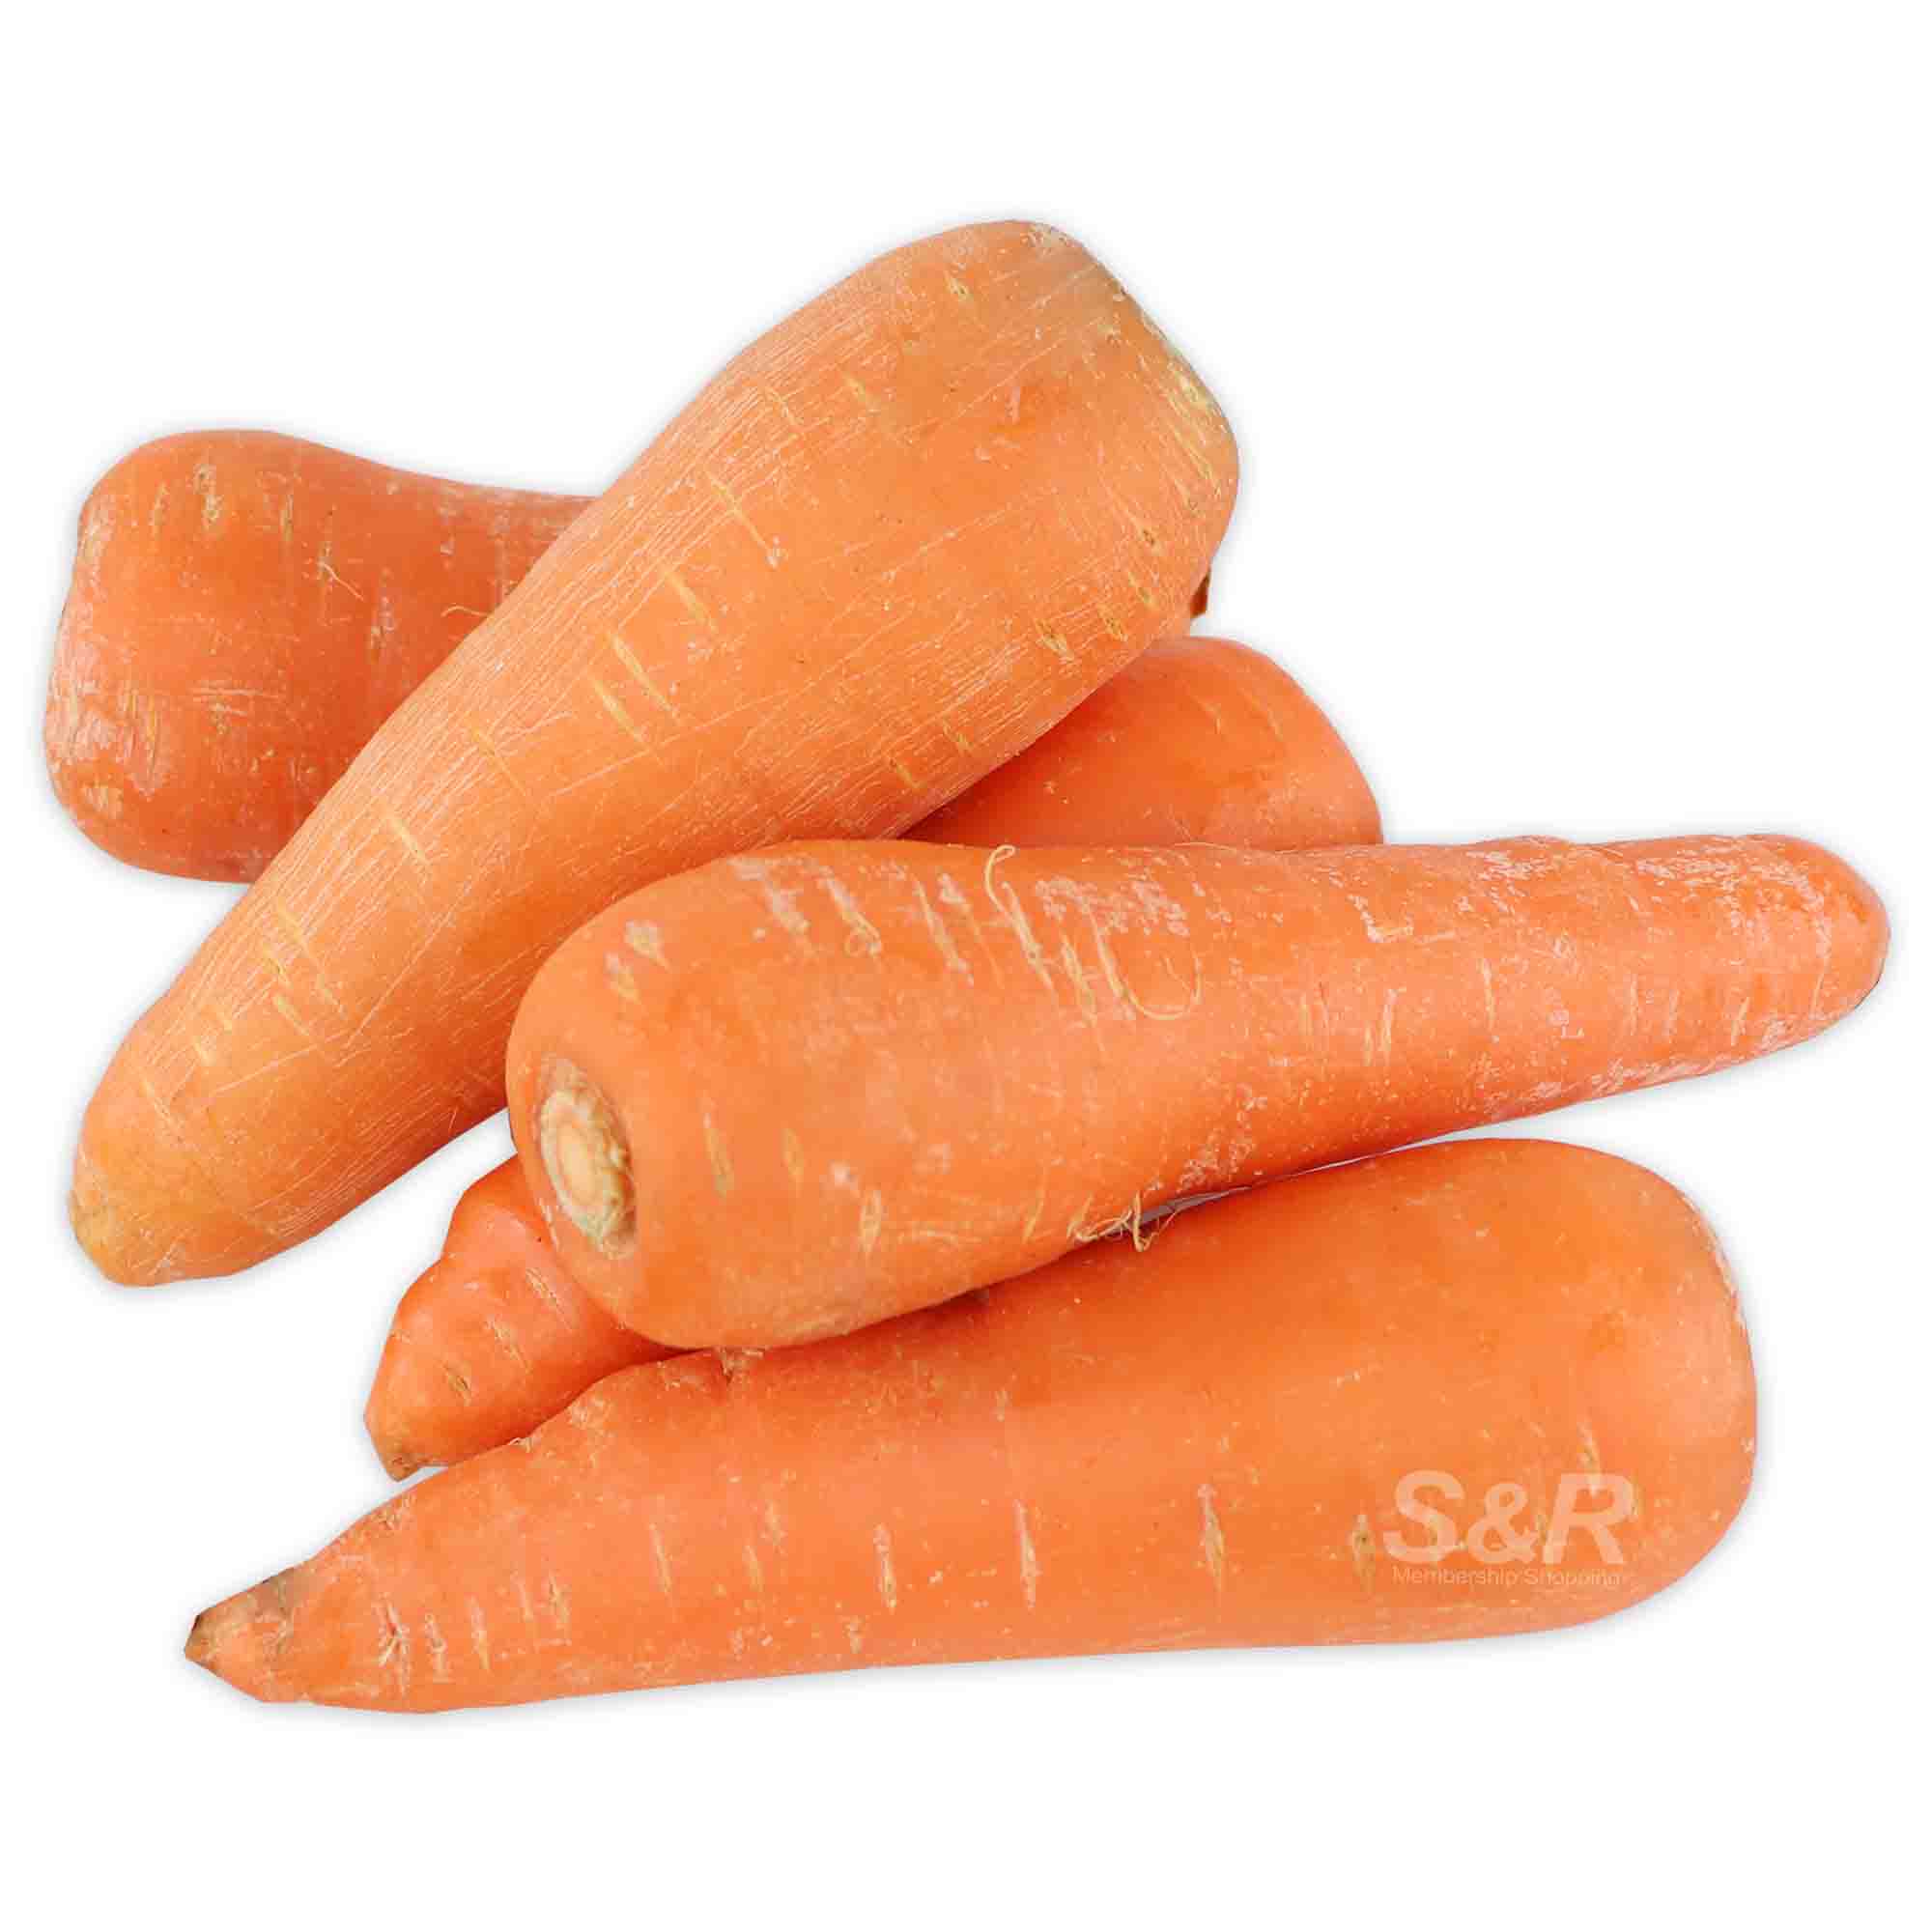 S&R Carrots approx. 800g